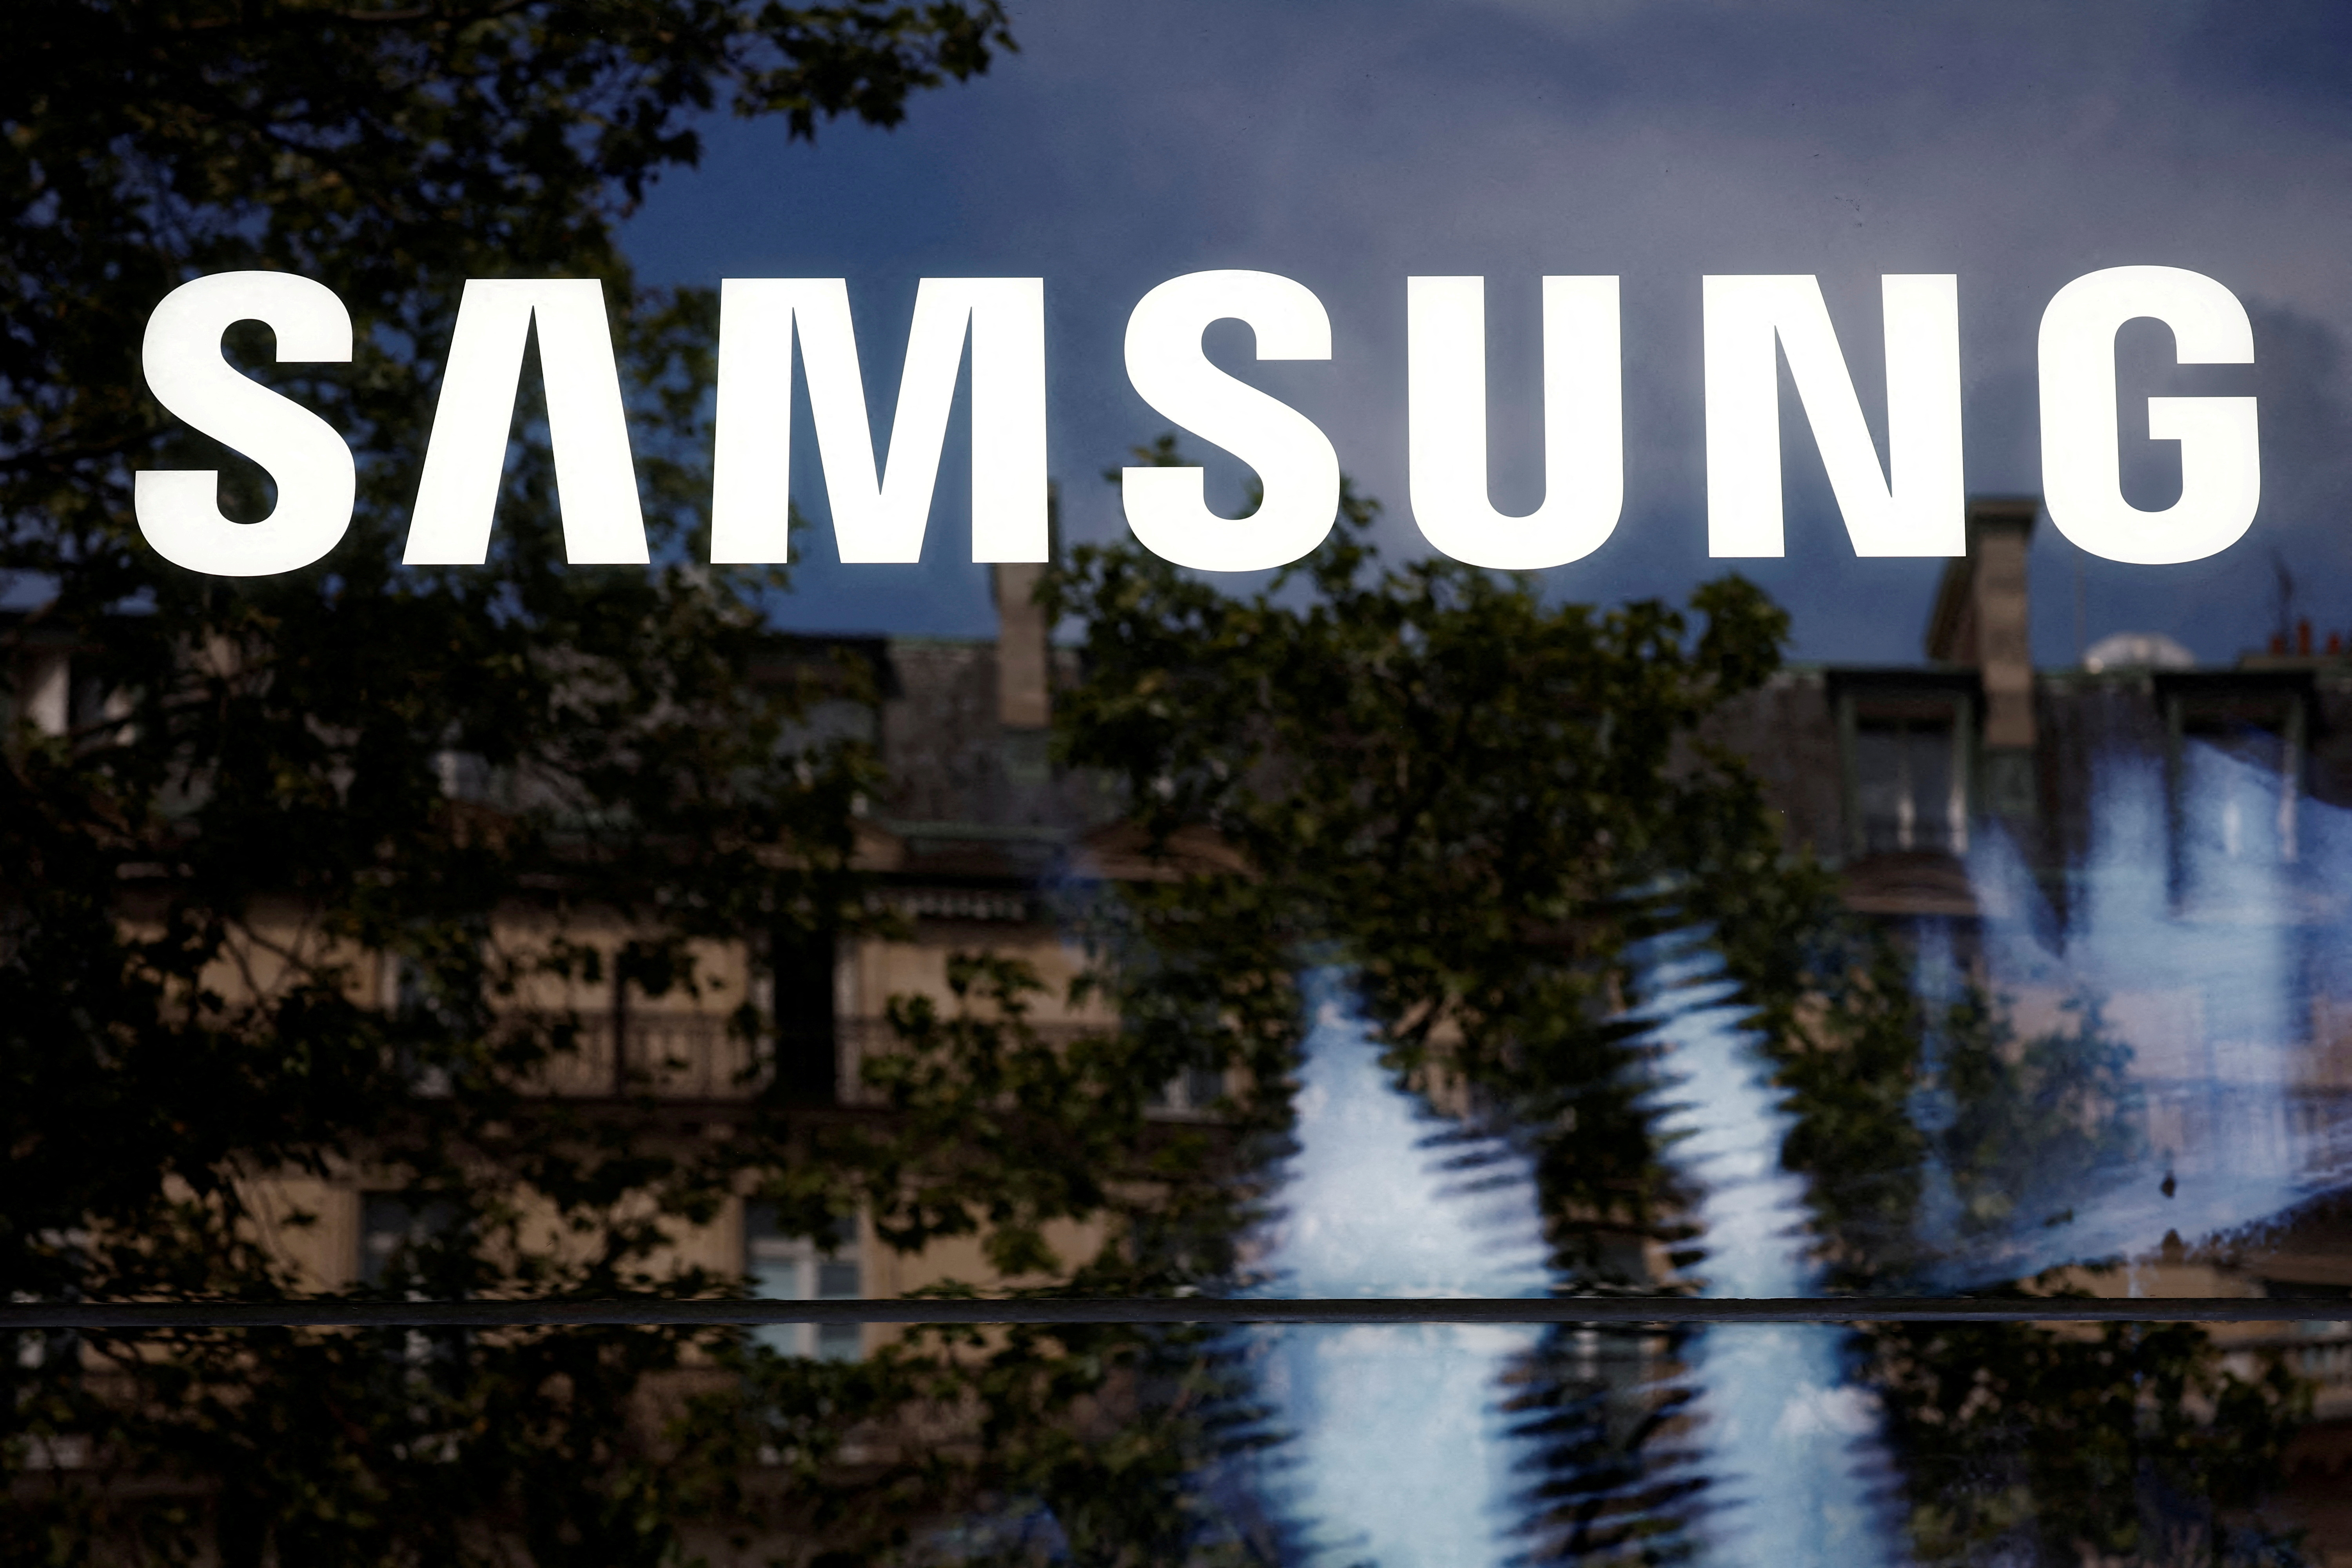 The Samsung logo is pictured at the Samsung Galaxy innovation space on the Champs-Elysees avenue in Paris